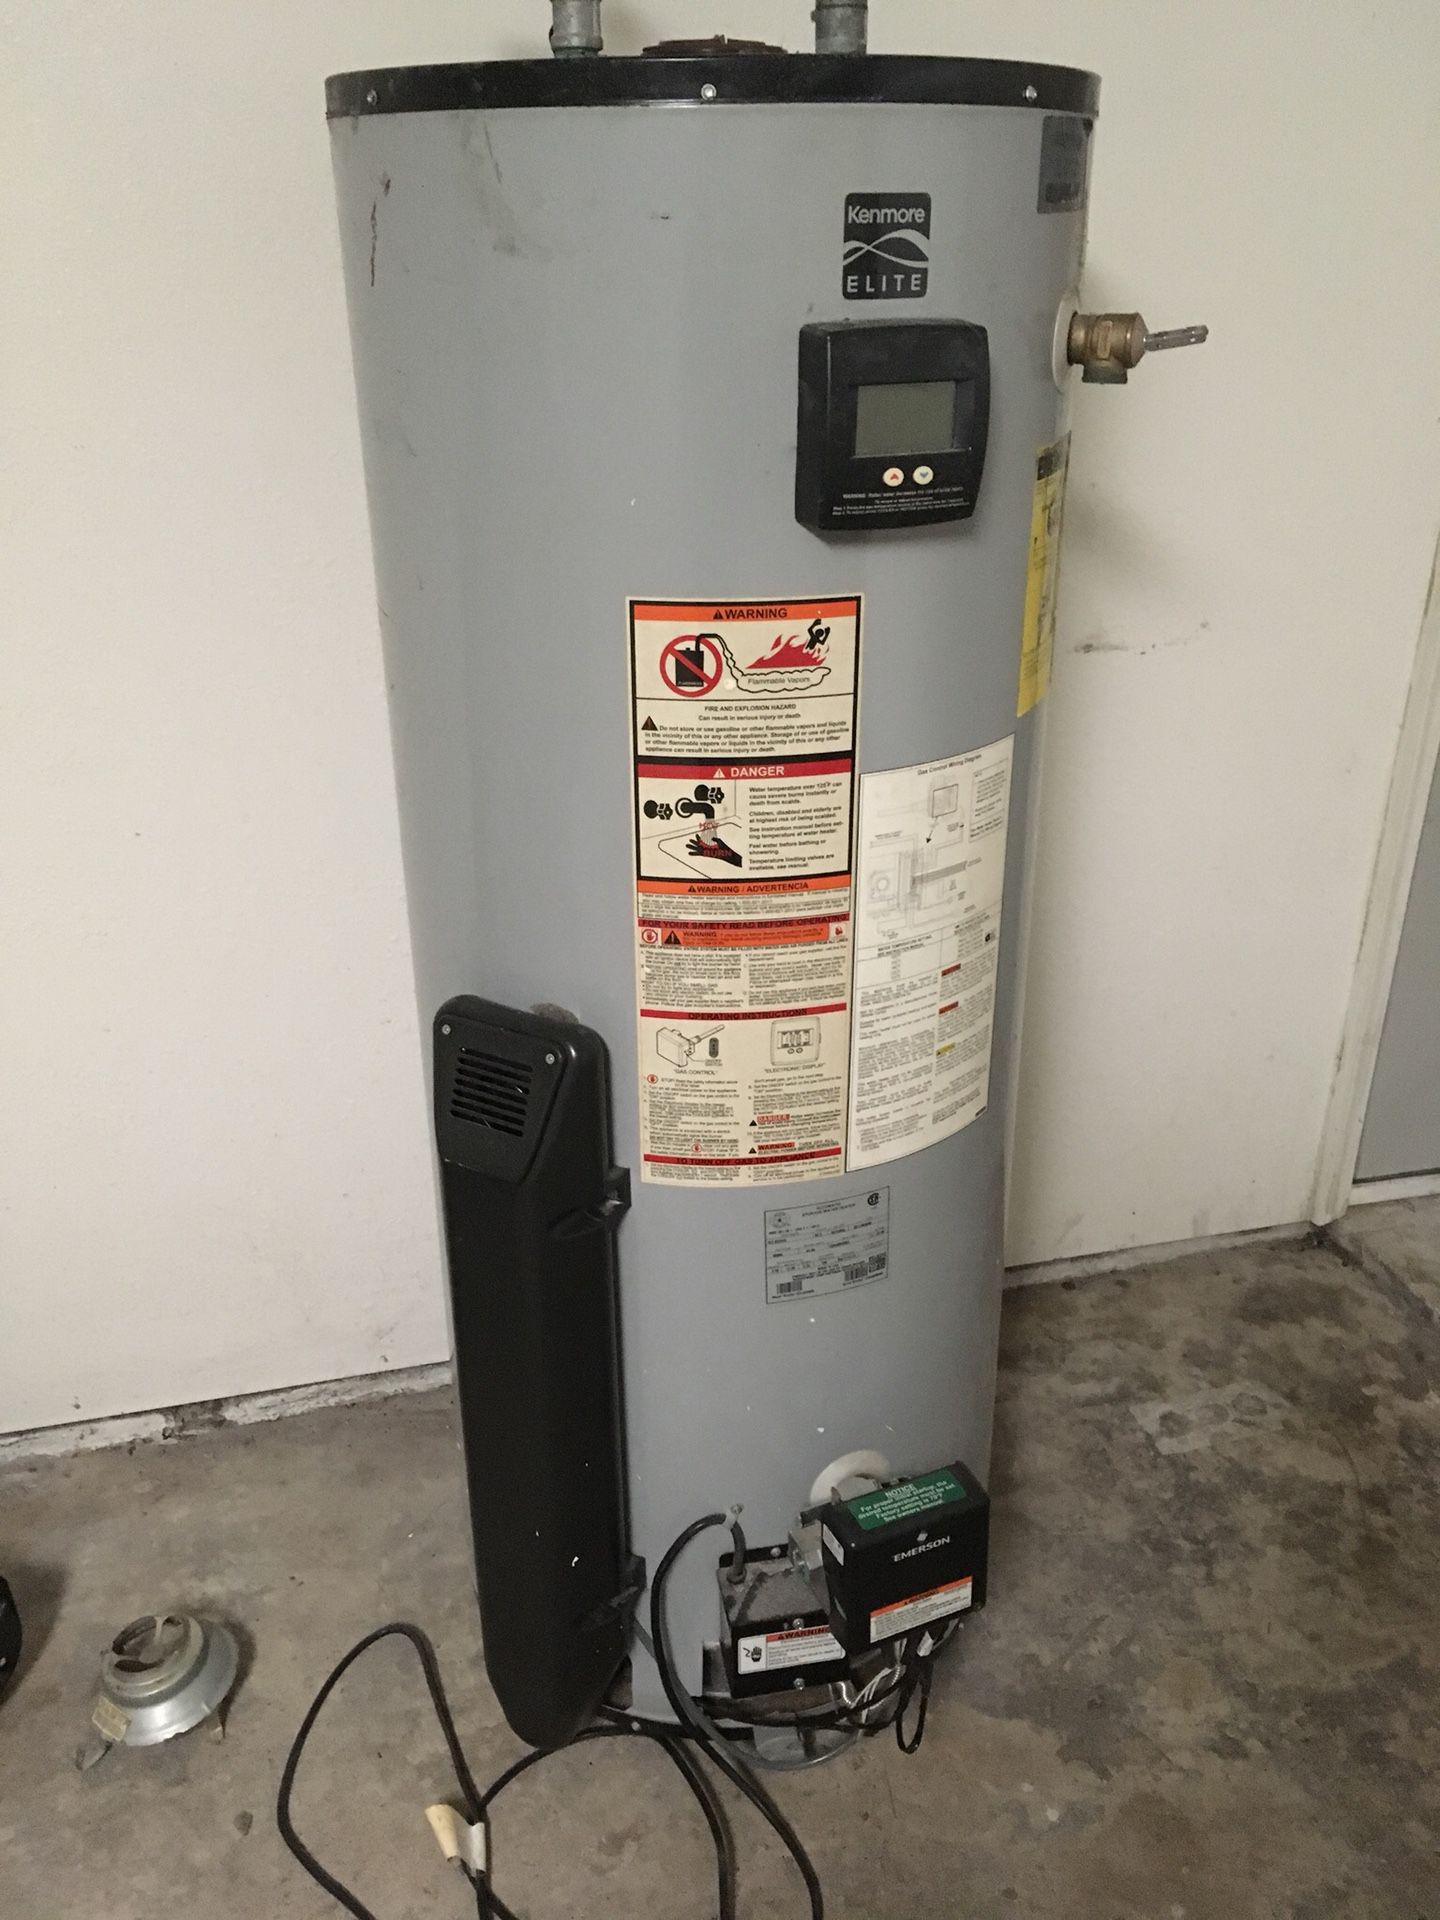 50 gallon kemore elite water heater natural model 153.332640 gas with 1 1/2 year Sear warranty part and labor